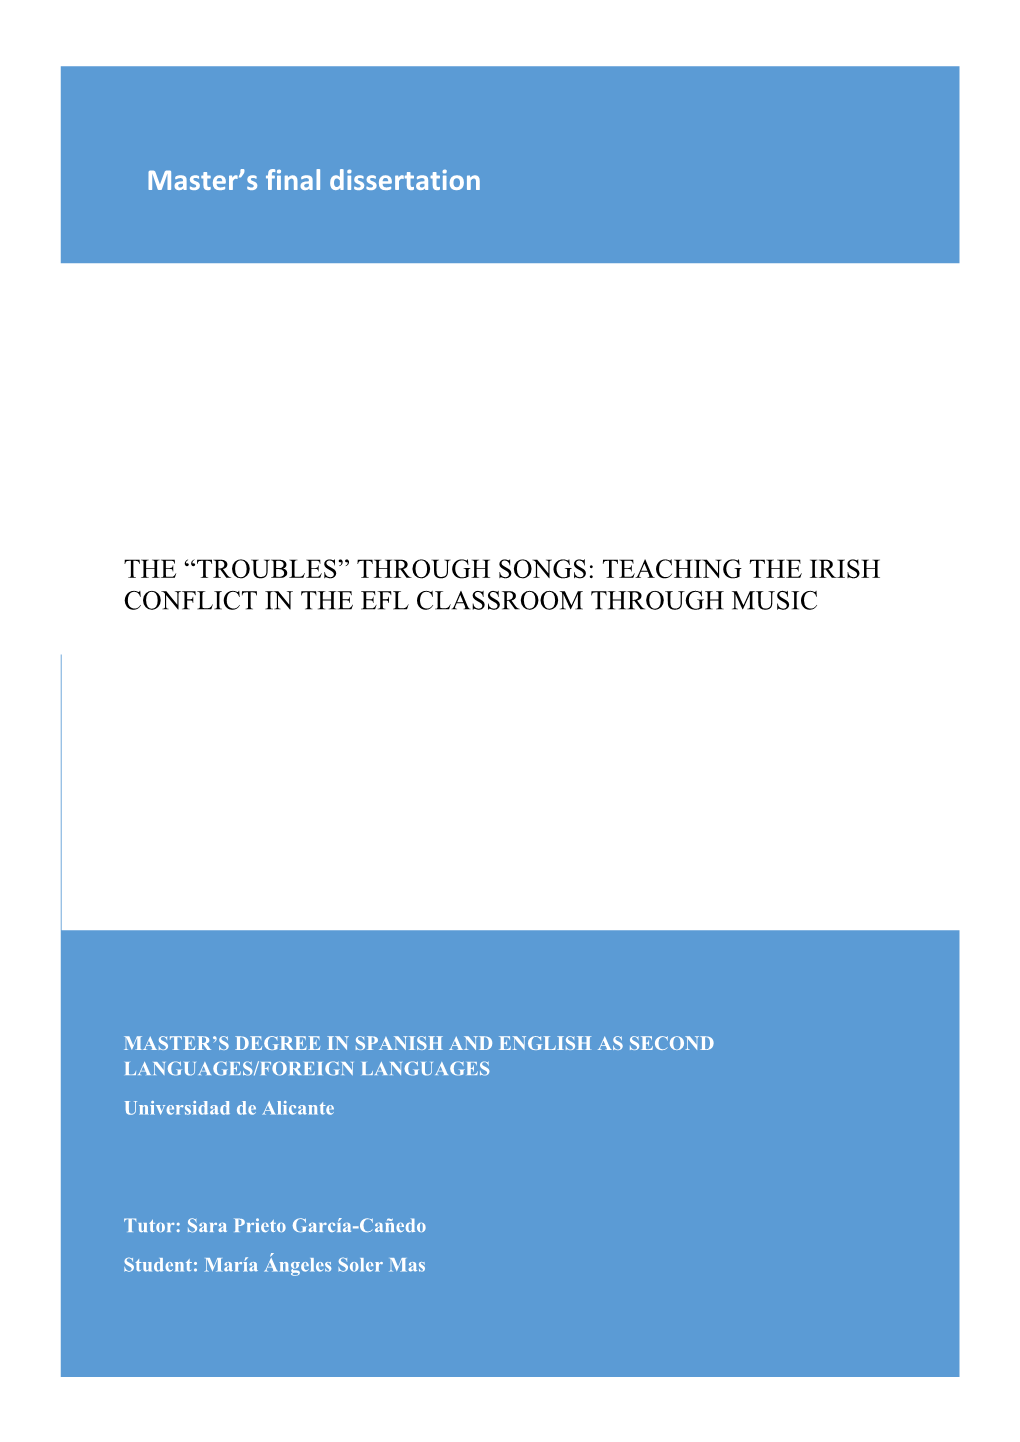 The “Troubles” Through Songs: Teaching the Irish Conflict in the Efl Classroom Through Music